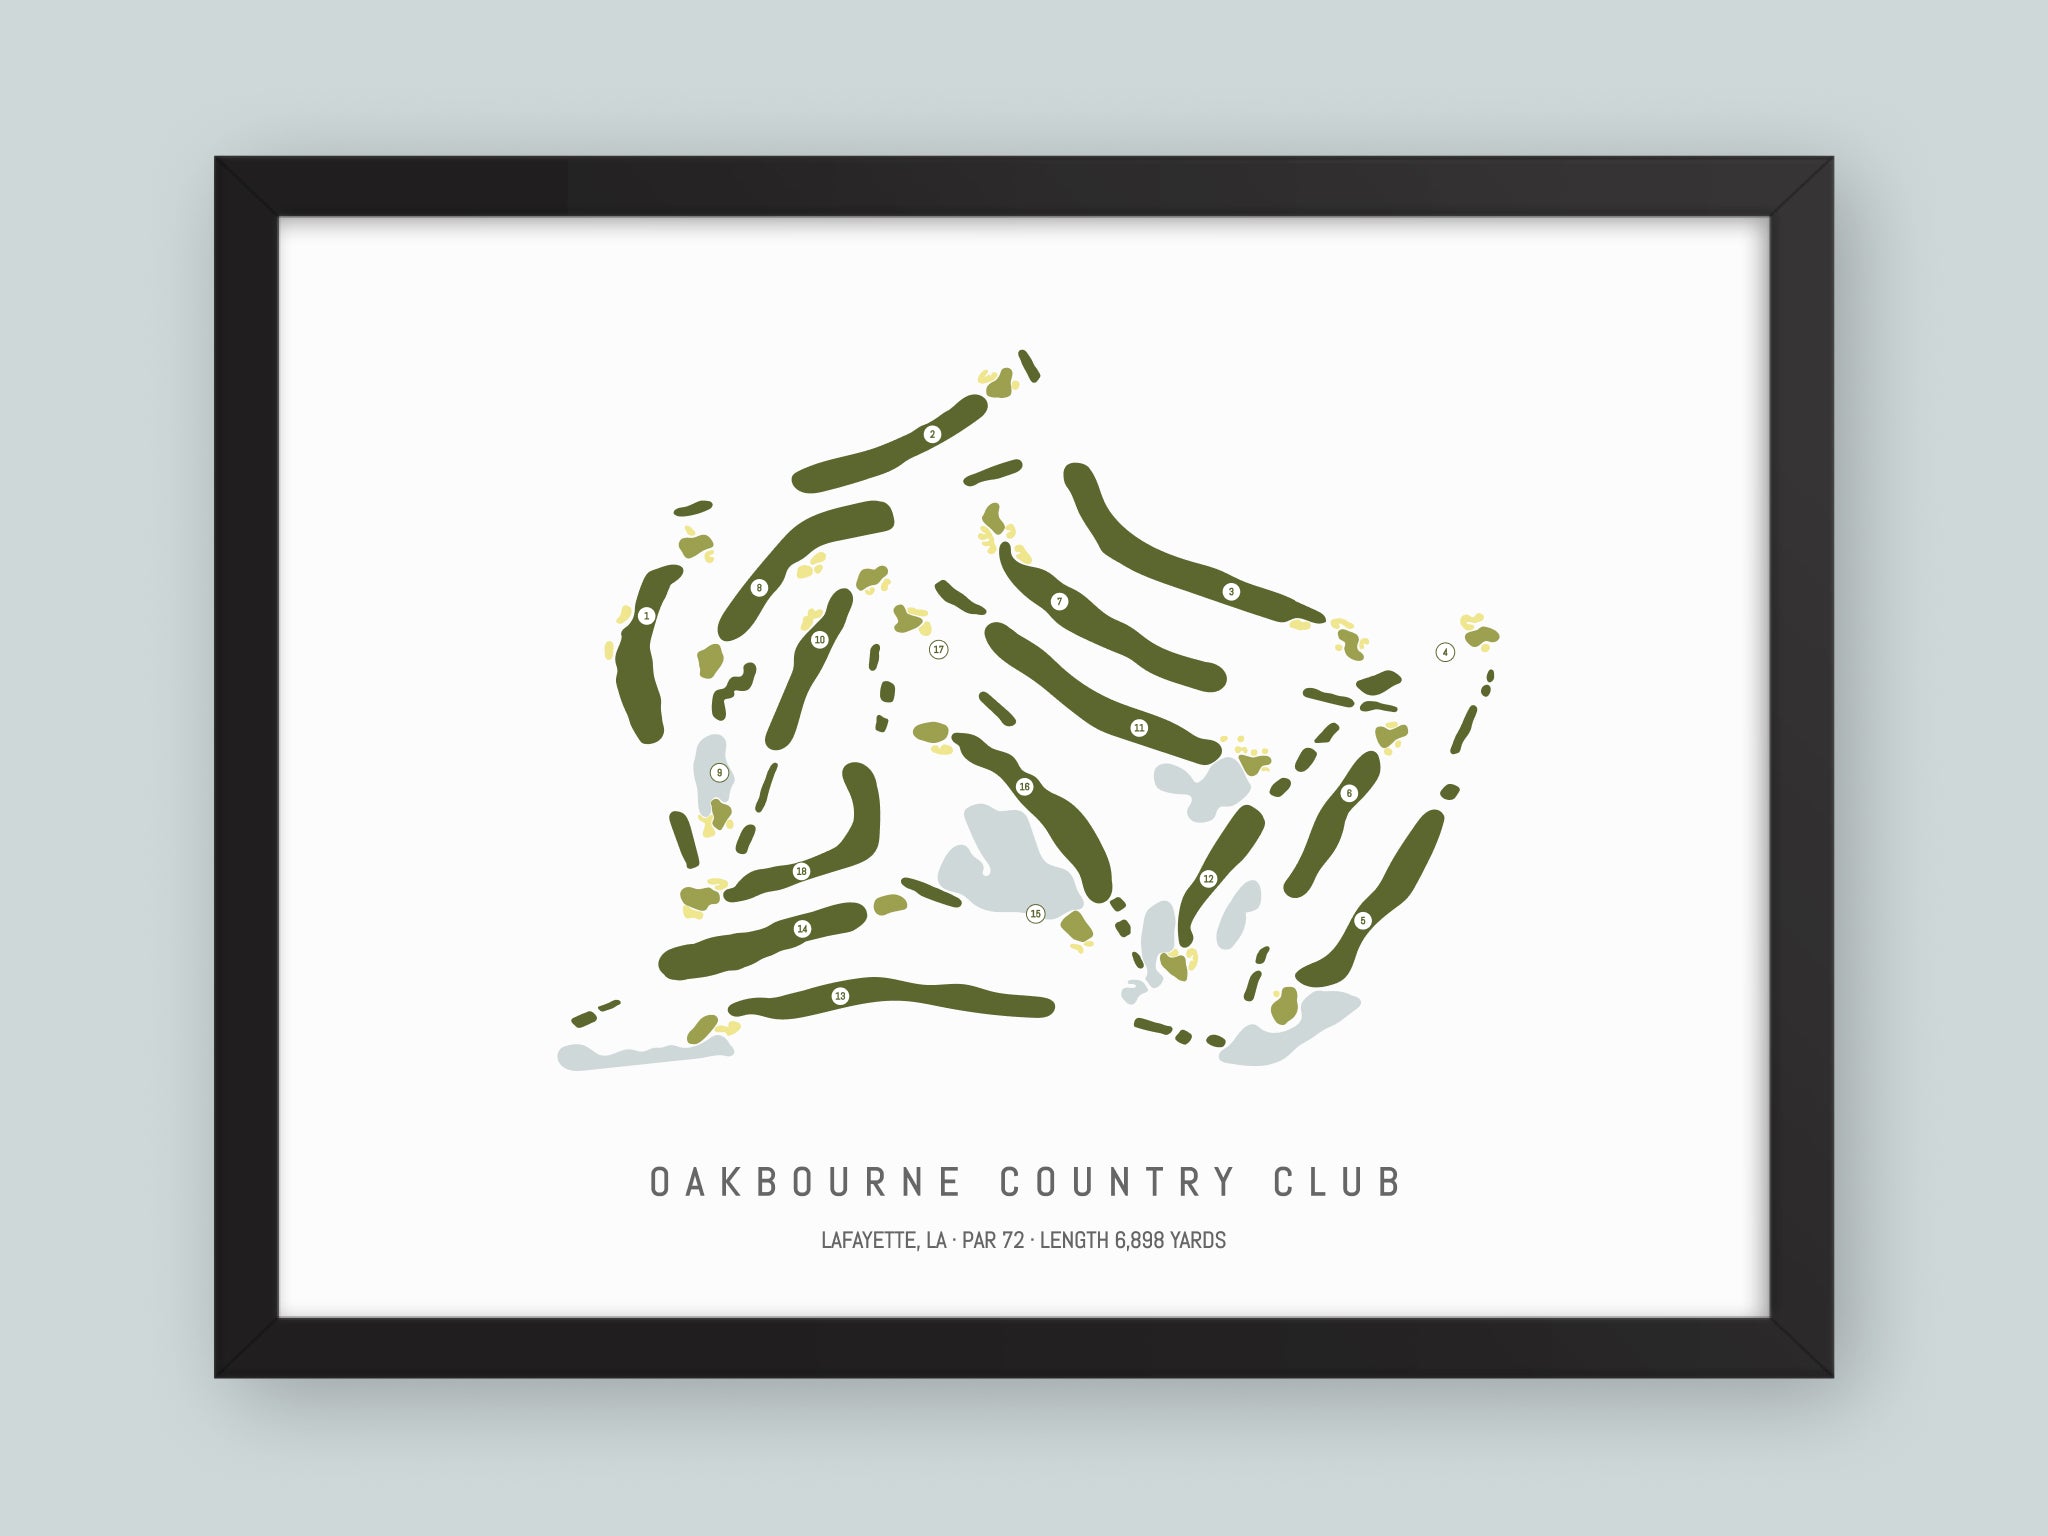 Oakbourne-Country-Club-LA--Black-Frame-24x18-With-Hole-Numbers